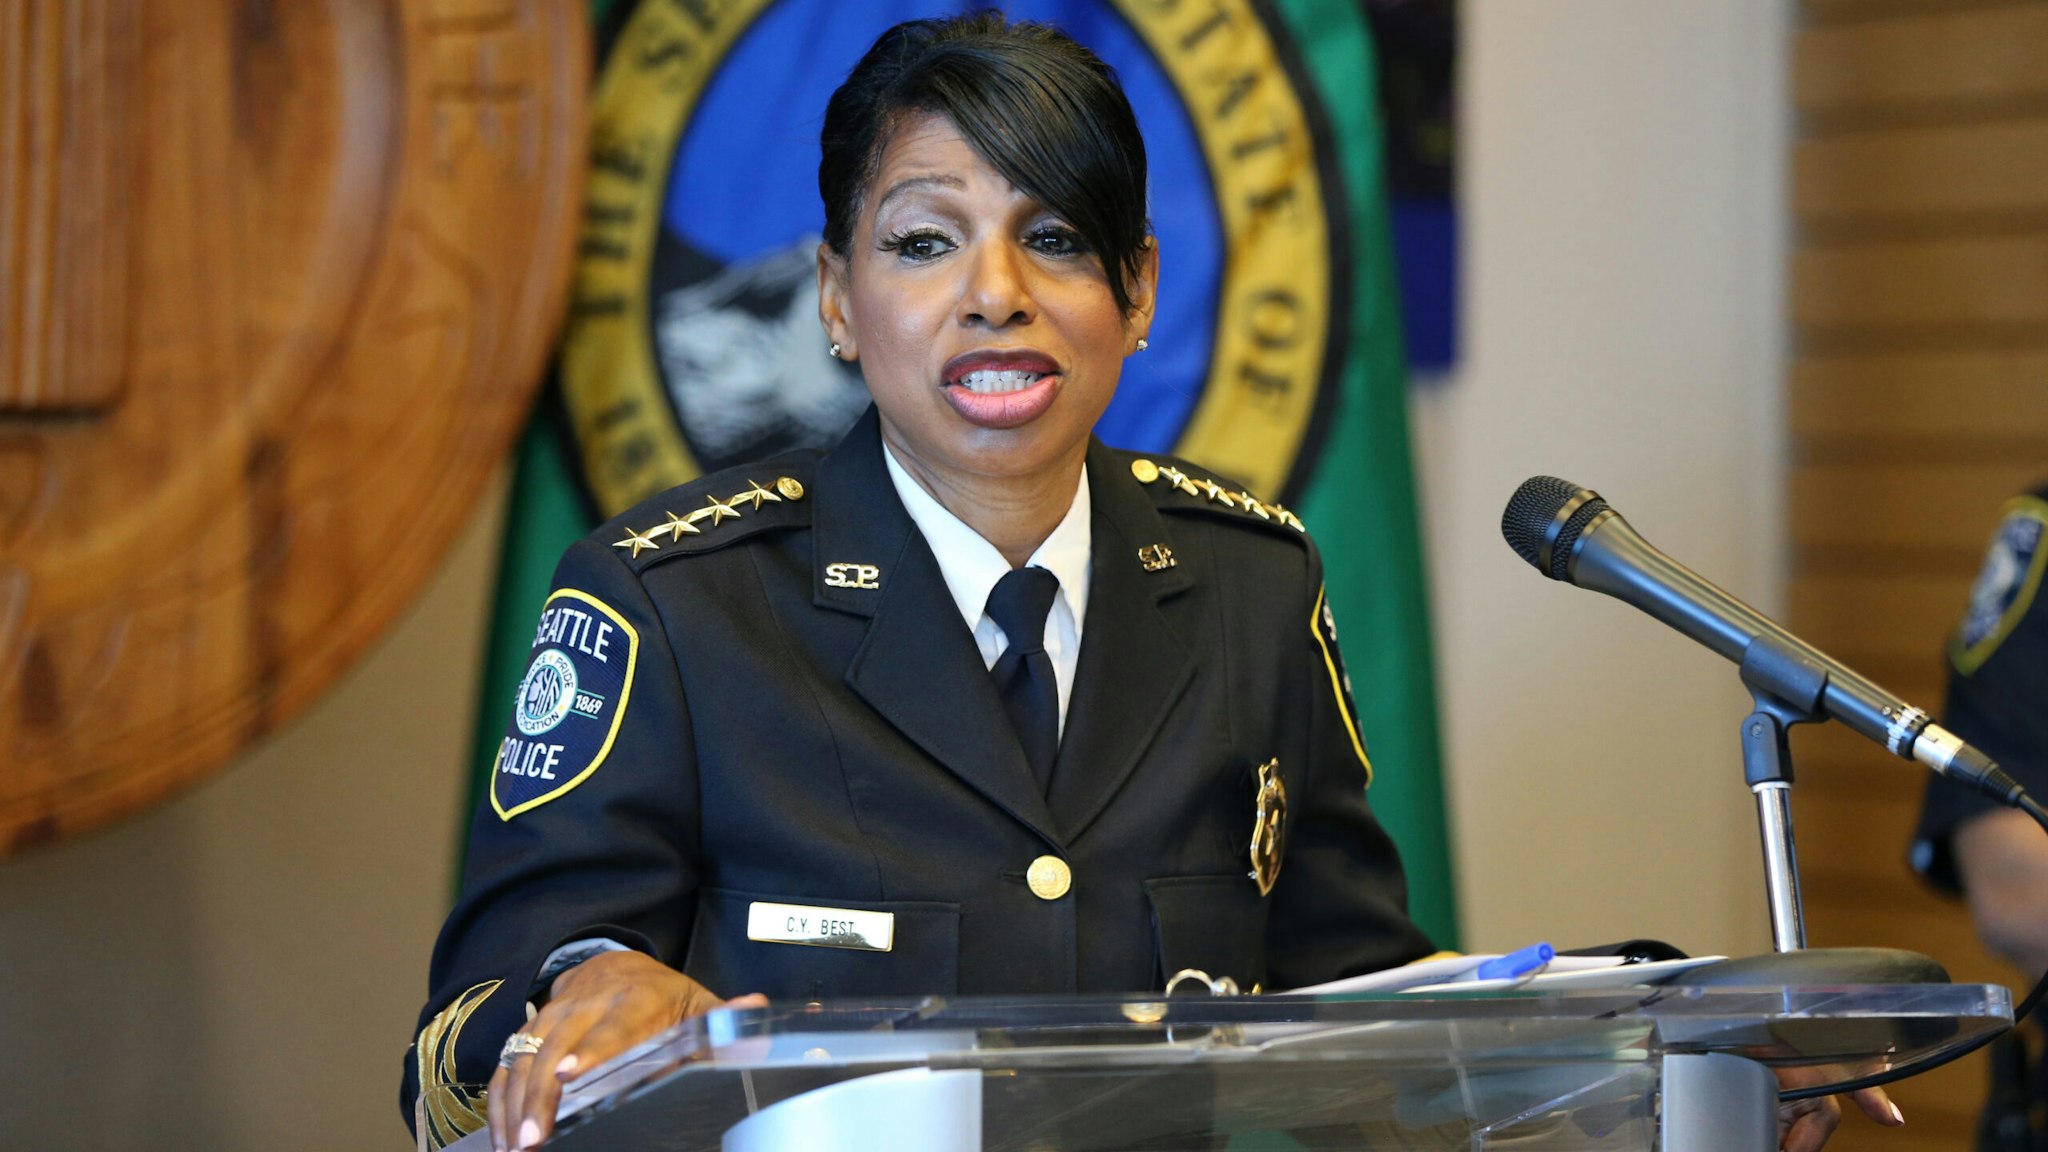 SEATTLE, WA - AUGUST 11: Seattle Police Chief Carmen Best announces her resignation at a press conference at Seattle City Hall on August 11, 2020 in Seattle, Washington. Her departure comes after months of protests against police brutality and votes by the City Council to defund her department by 14%.